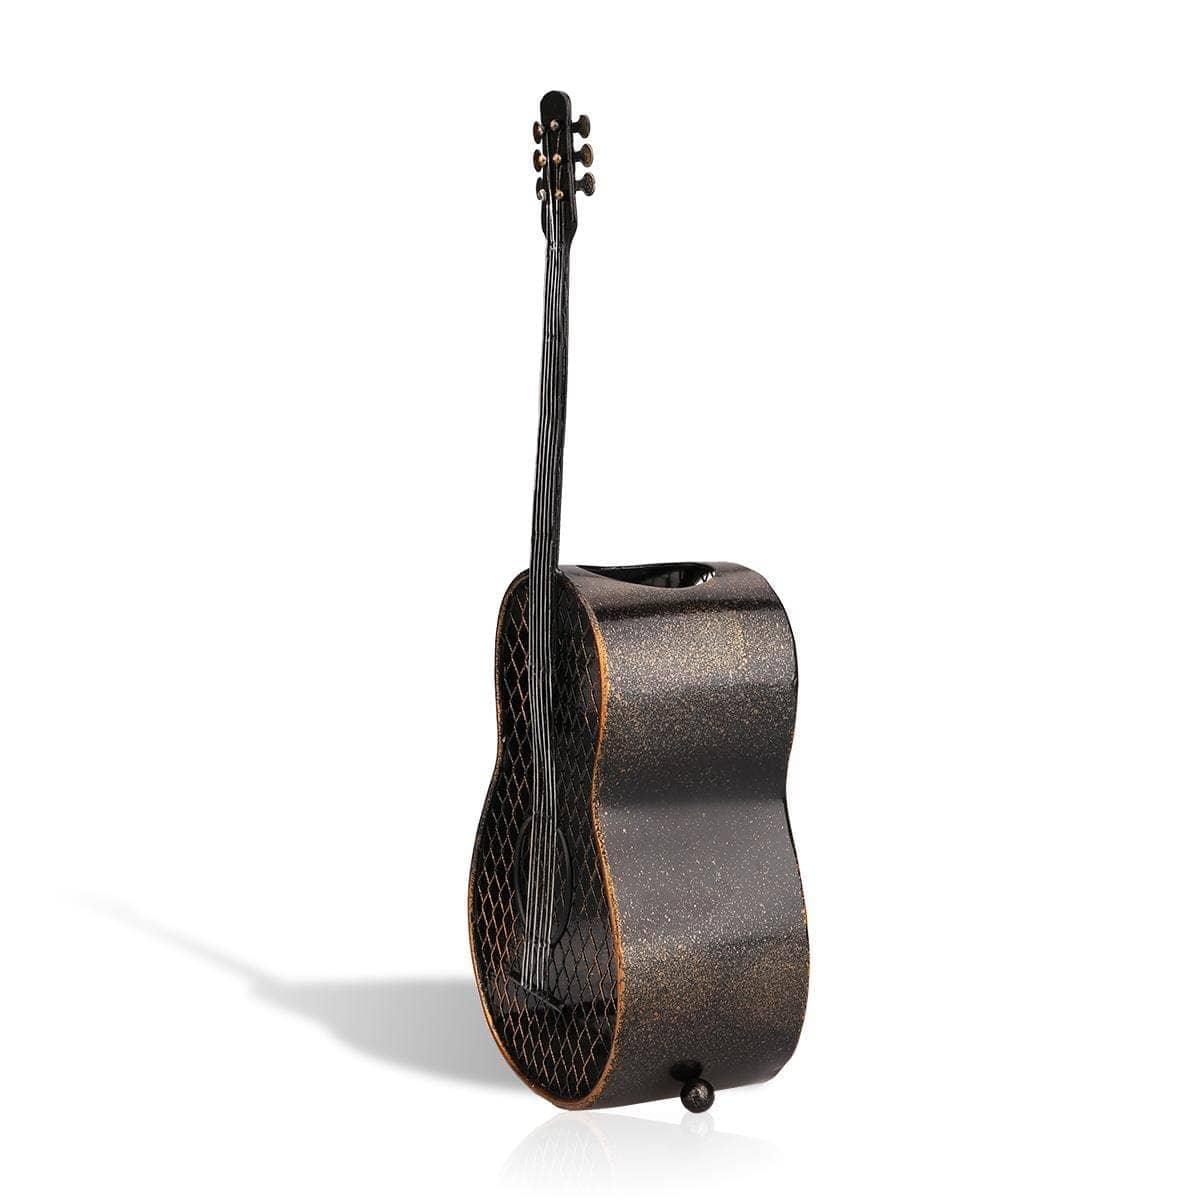 Guitar Wine Cork Container: Modern and Chic Home Accessory